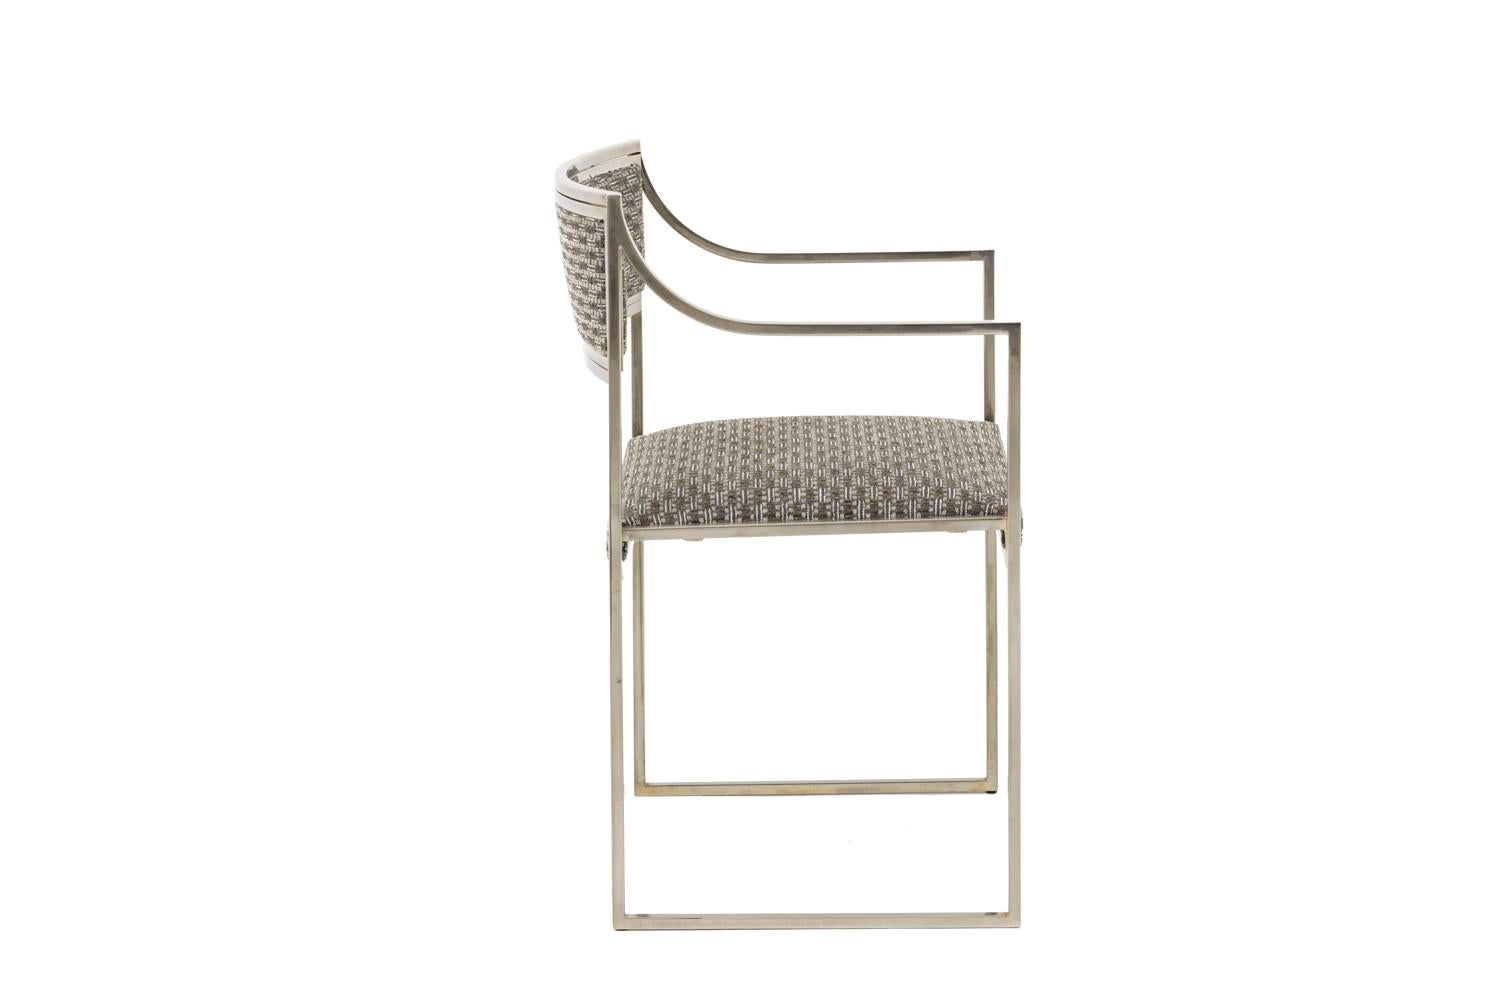 Italian Willy Rizzo, Chromed Metal Armchair, 1970s For Sale